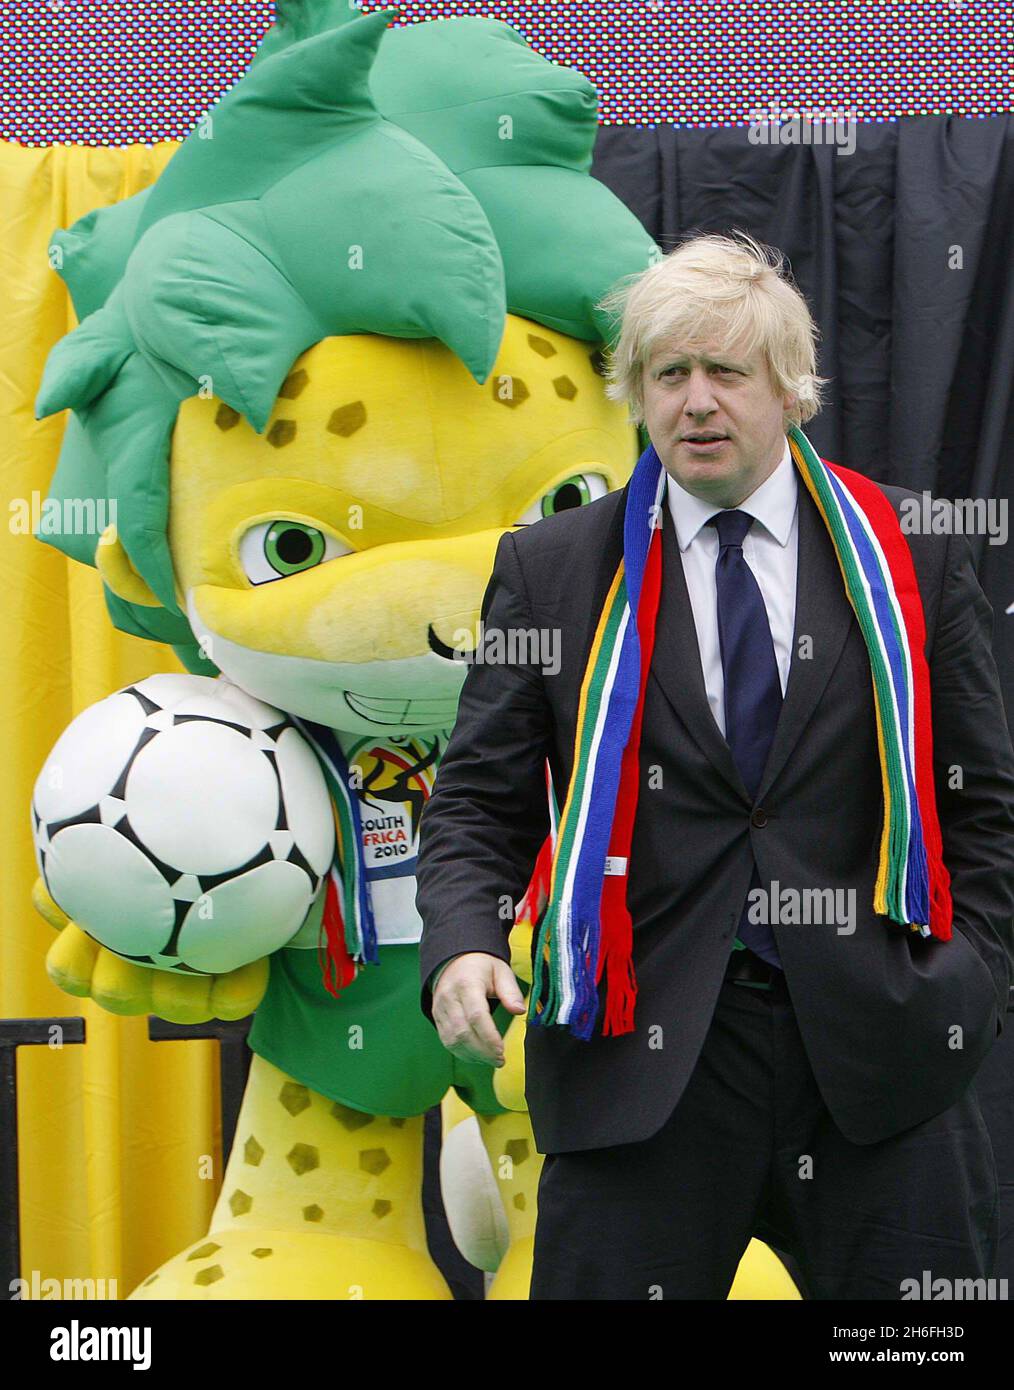 The Mayor of London Boris Johnson welcomes the start of the Fifa World Cup alongside Zakumi the Official Mascot of the 2010 World Cup with local children in Trafalgar Square, London Stock Photo